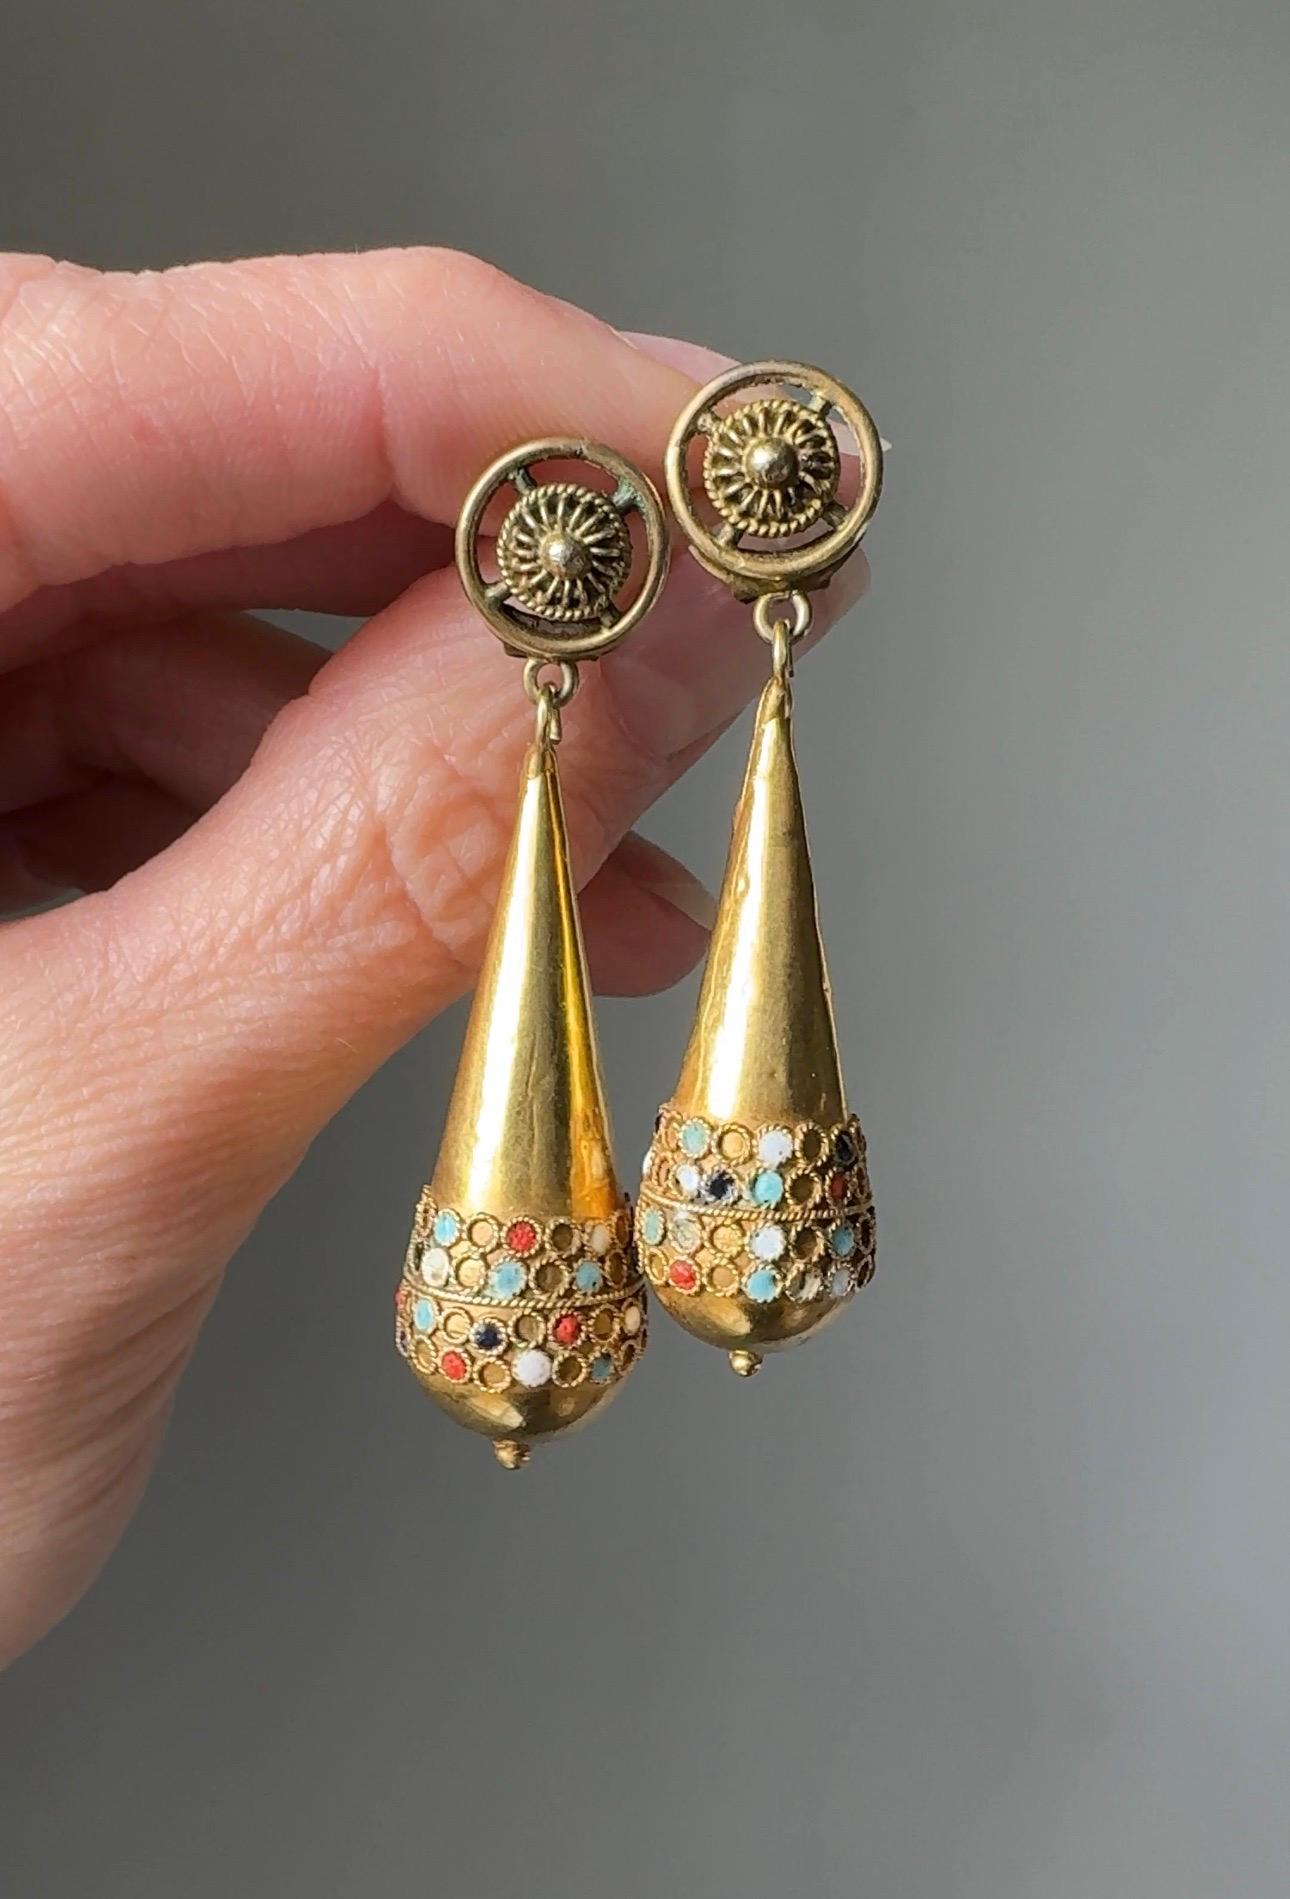 14K Etruscan Revival Torpedo Drop Earrings with Enamel Details - 1880 In Good Condition For Sale In Hummelstown, PA